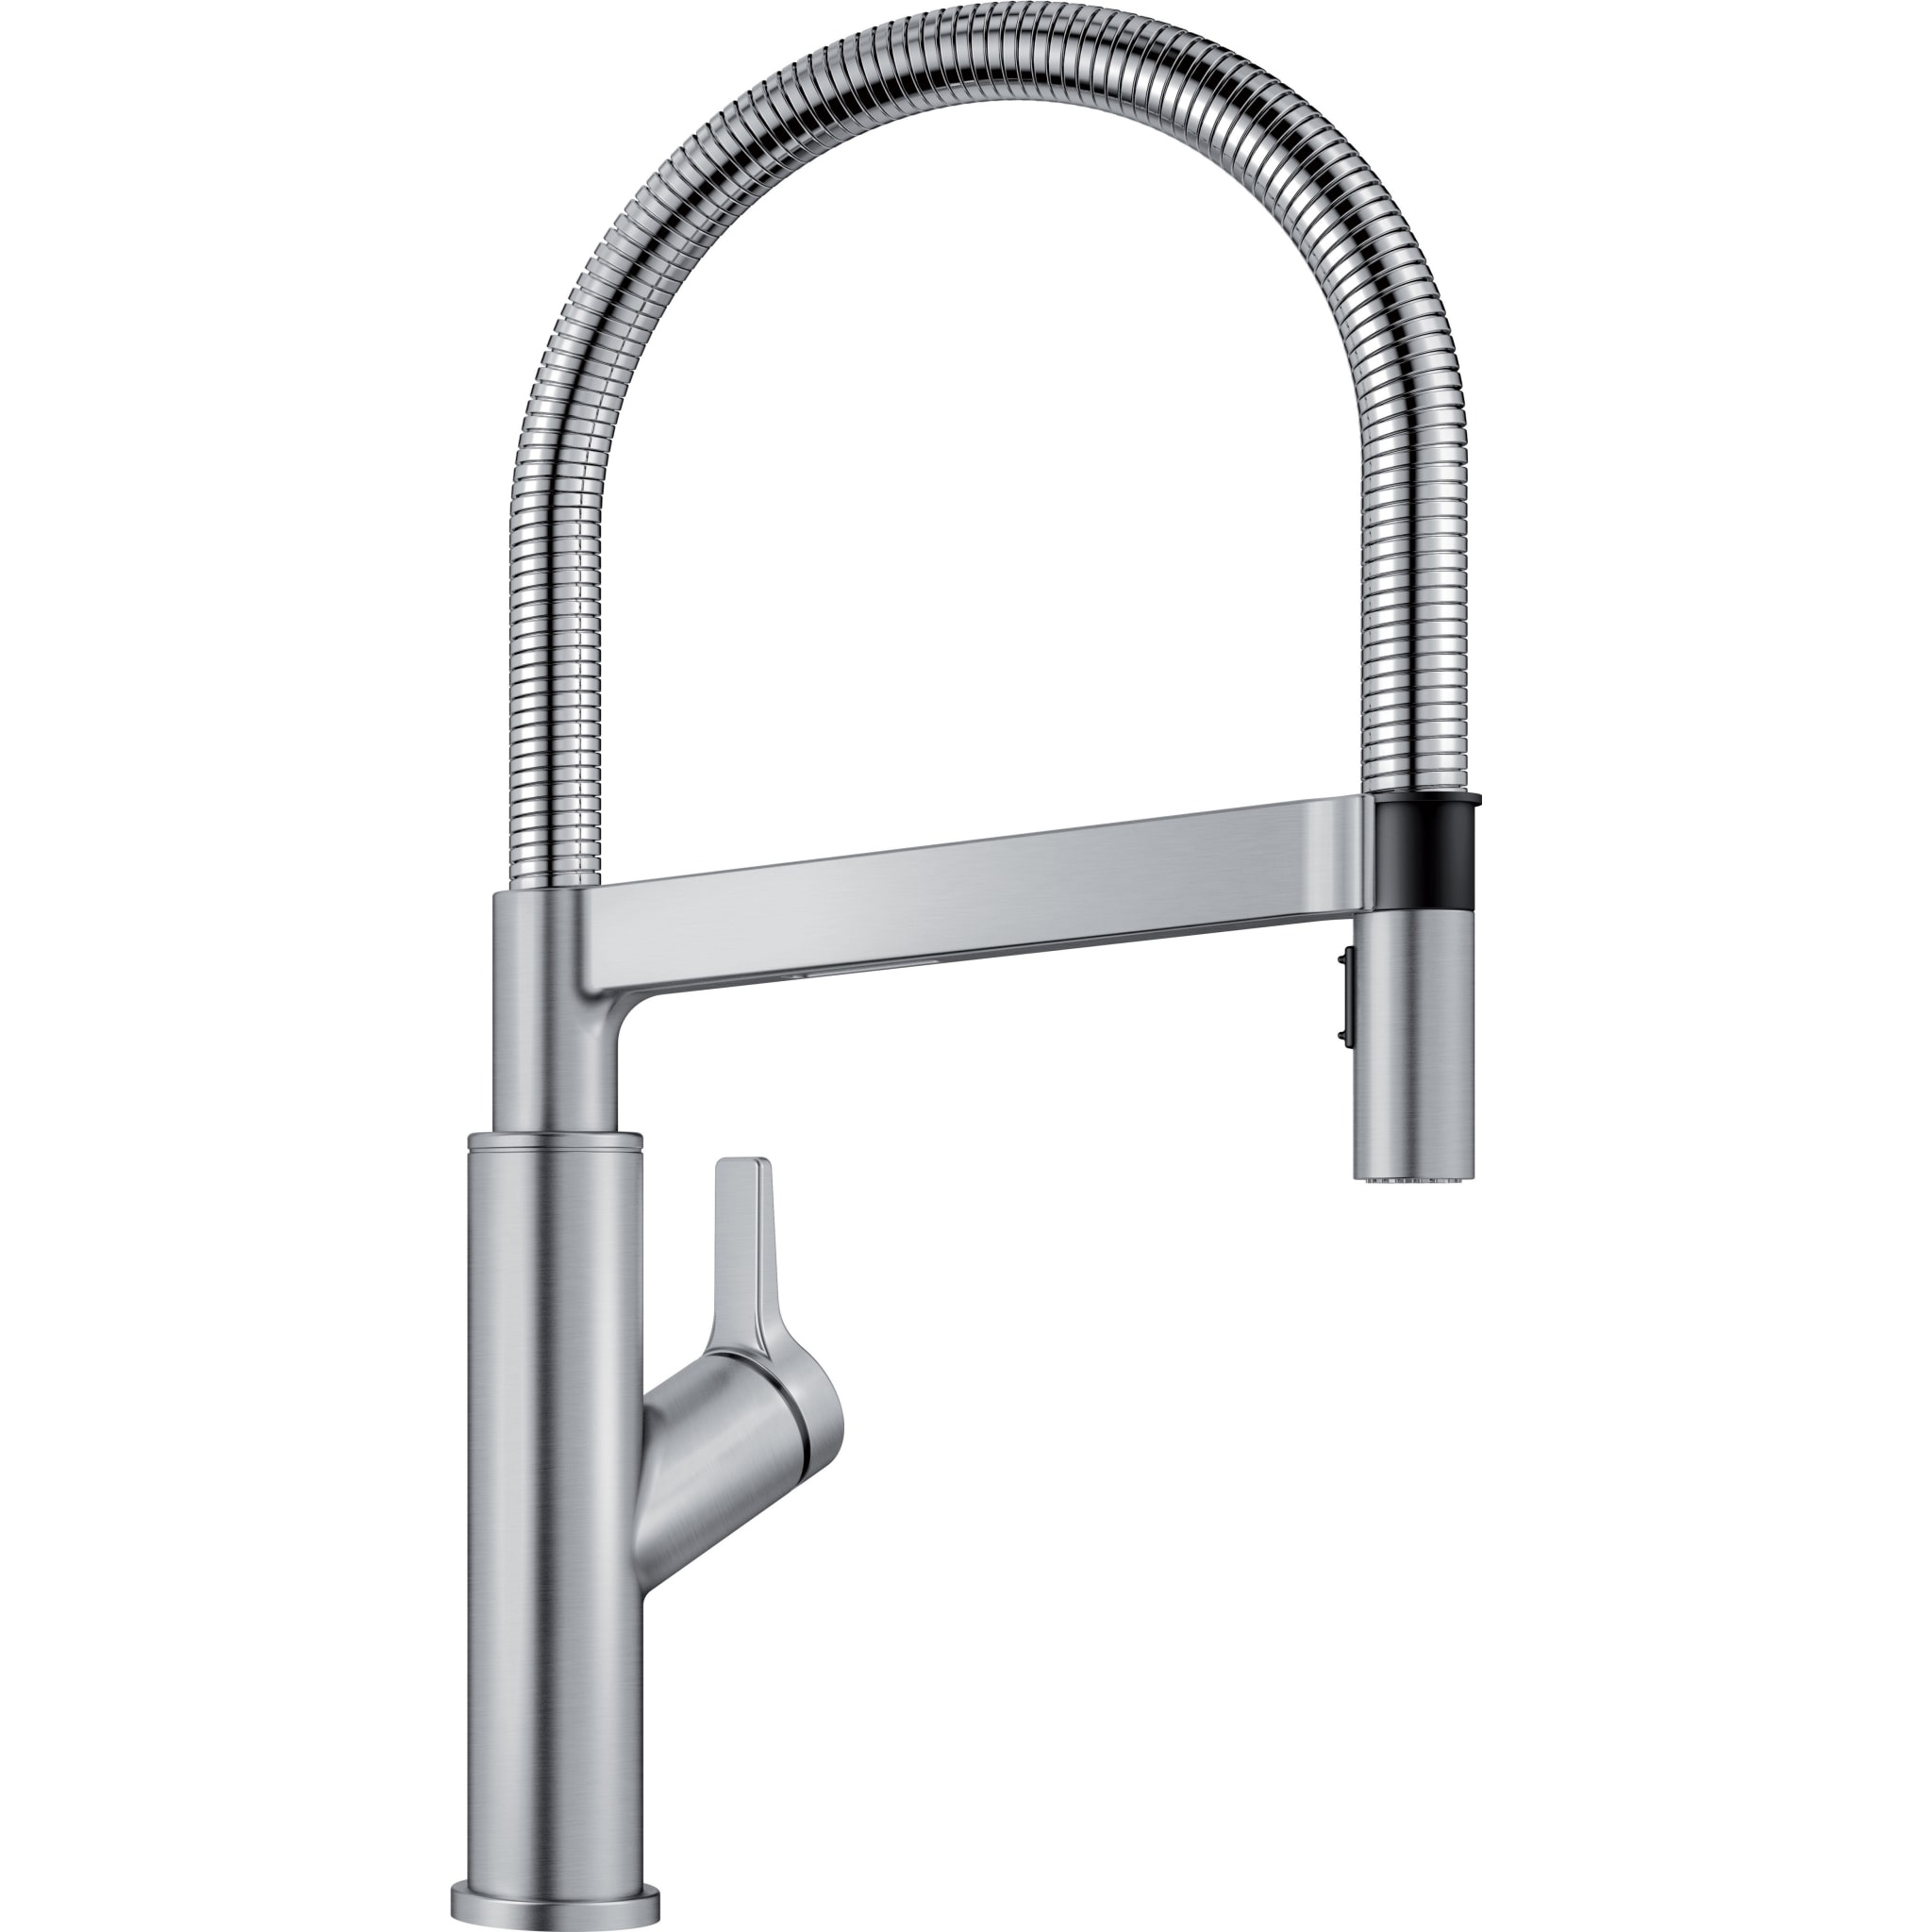 Solenta Semi-Pro High Pressure Kitchen Faucet in Stainless 1.5 gpm